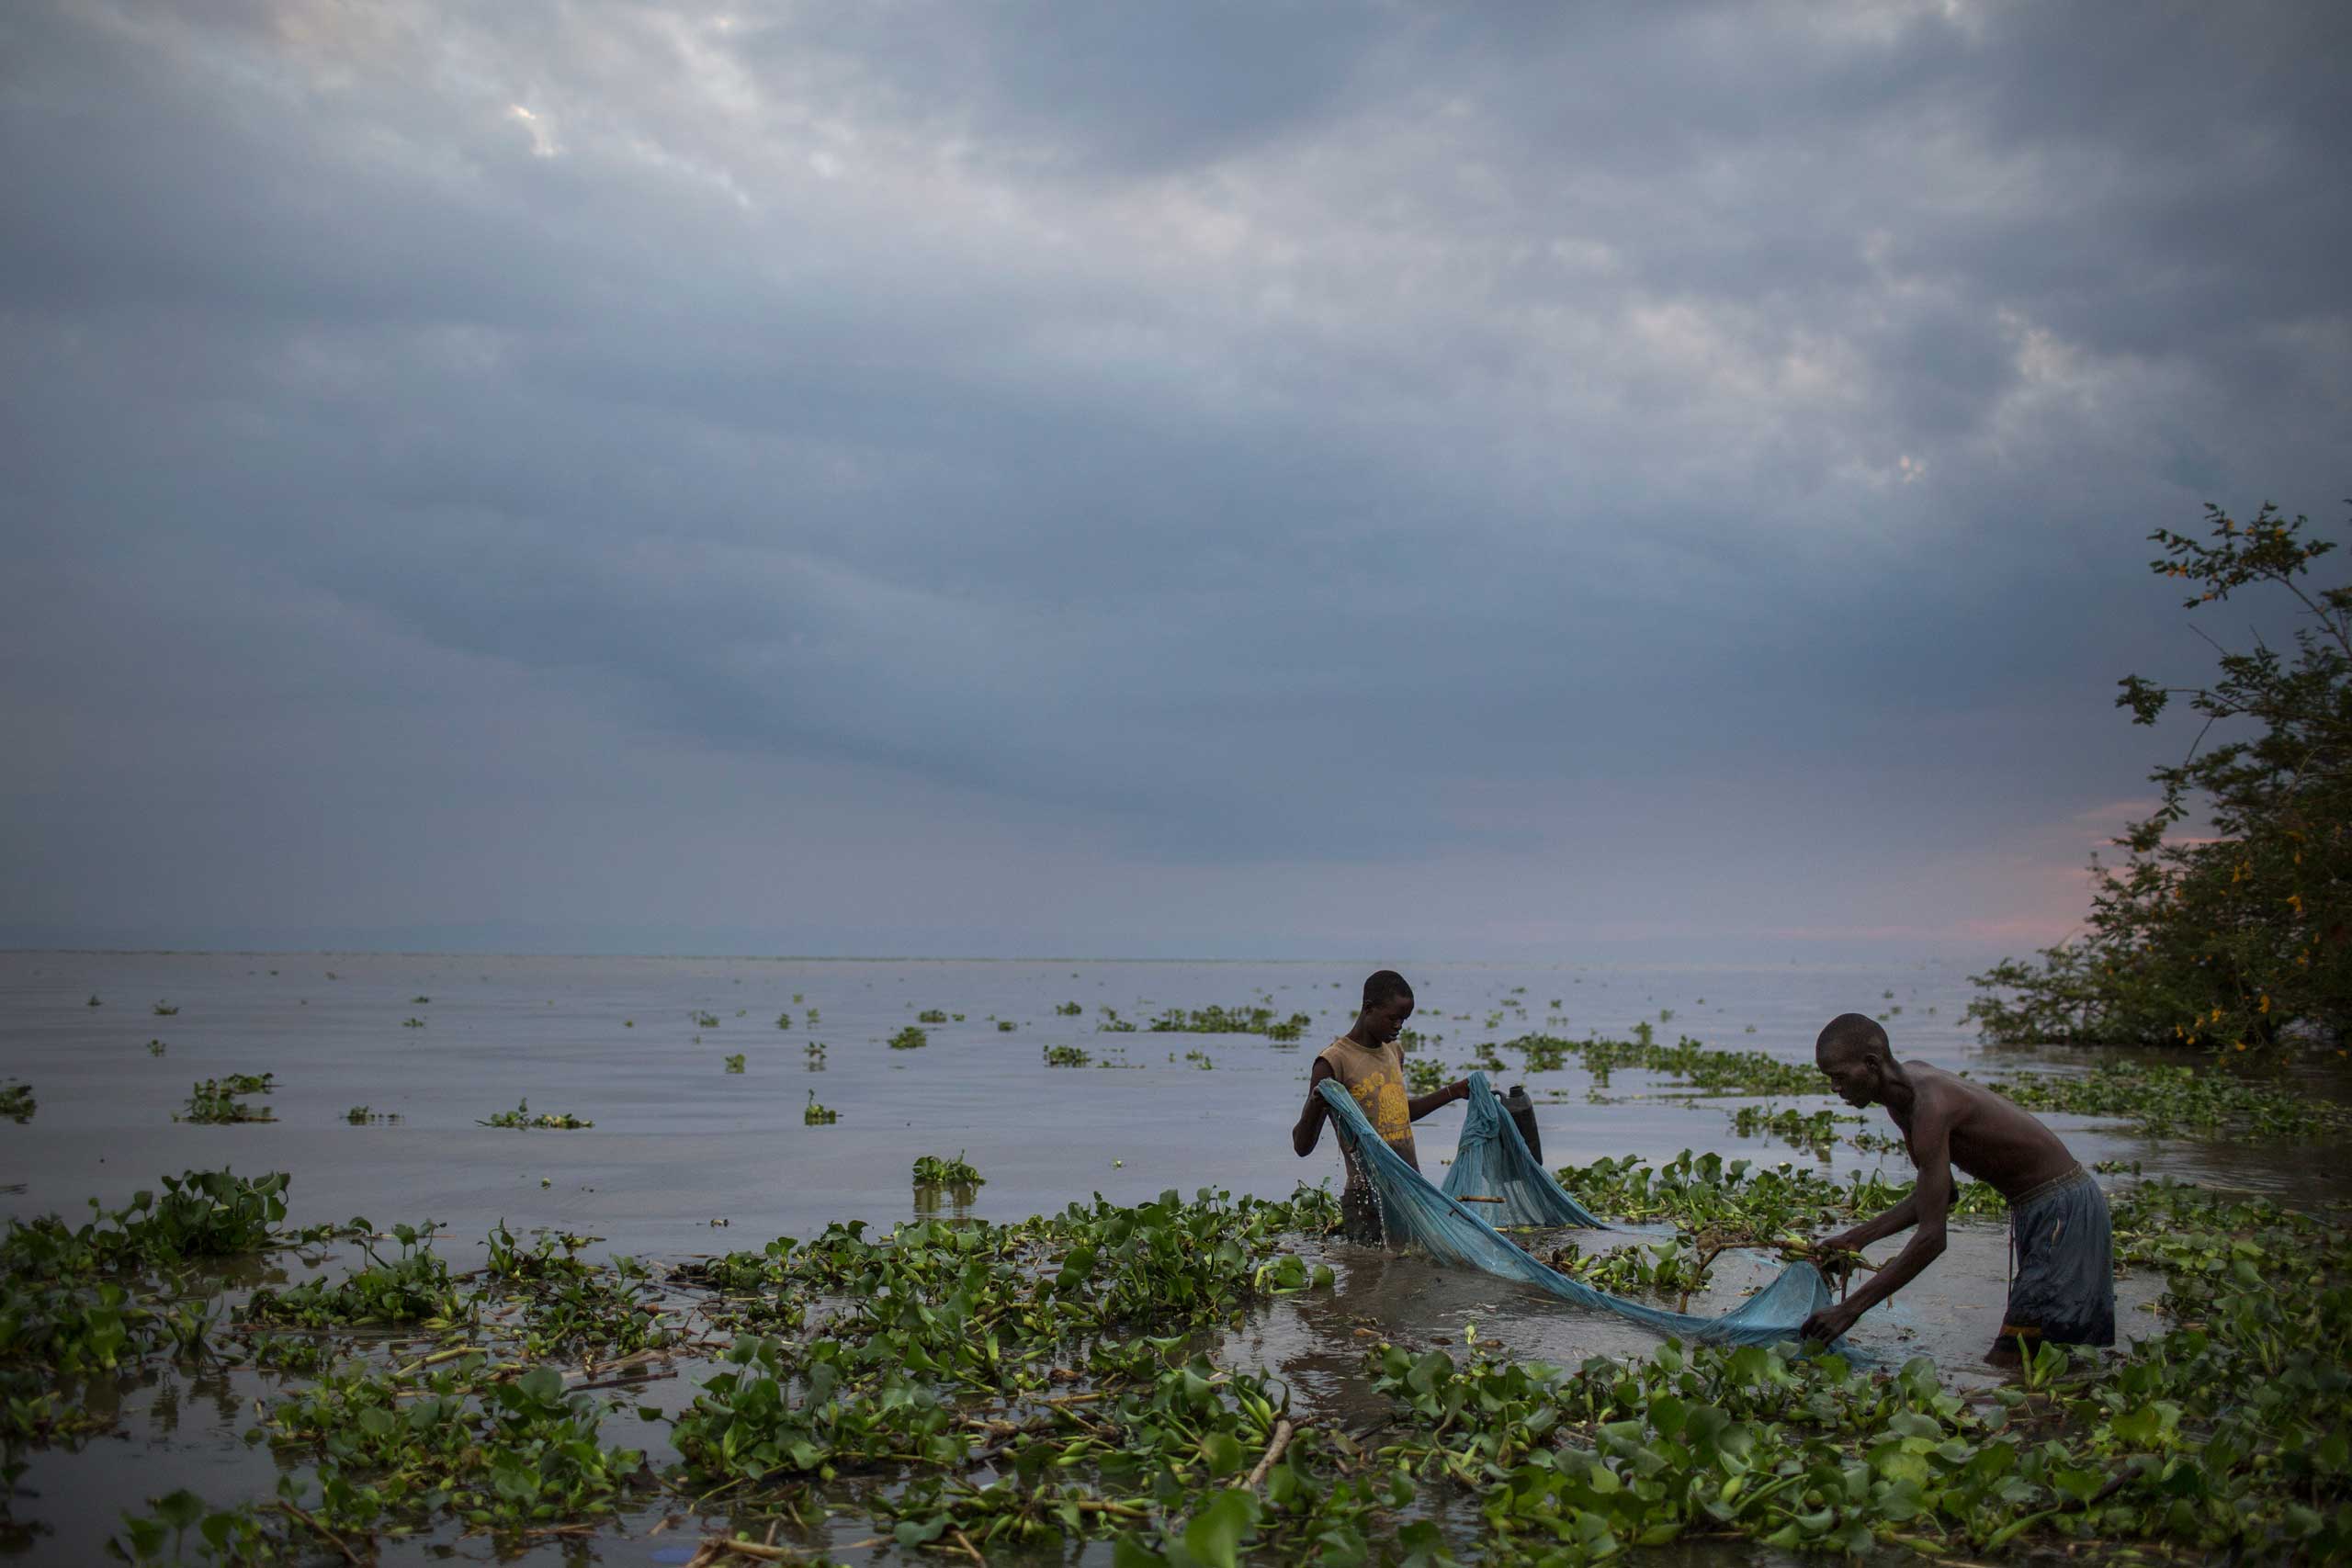 The New York Times: In Africa, Mosquito Nets Are Putting Fish at RiskTwo men use a mosquito net in shallows of Lake Victoria to catch baby catfish to sell as bait, in Kenya, Aug. 2014.